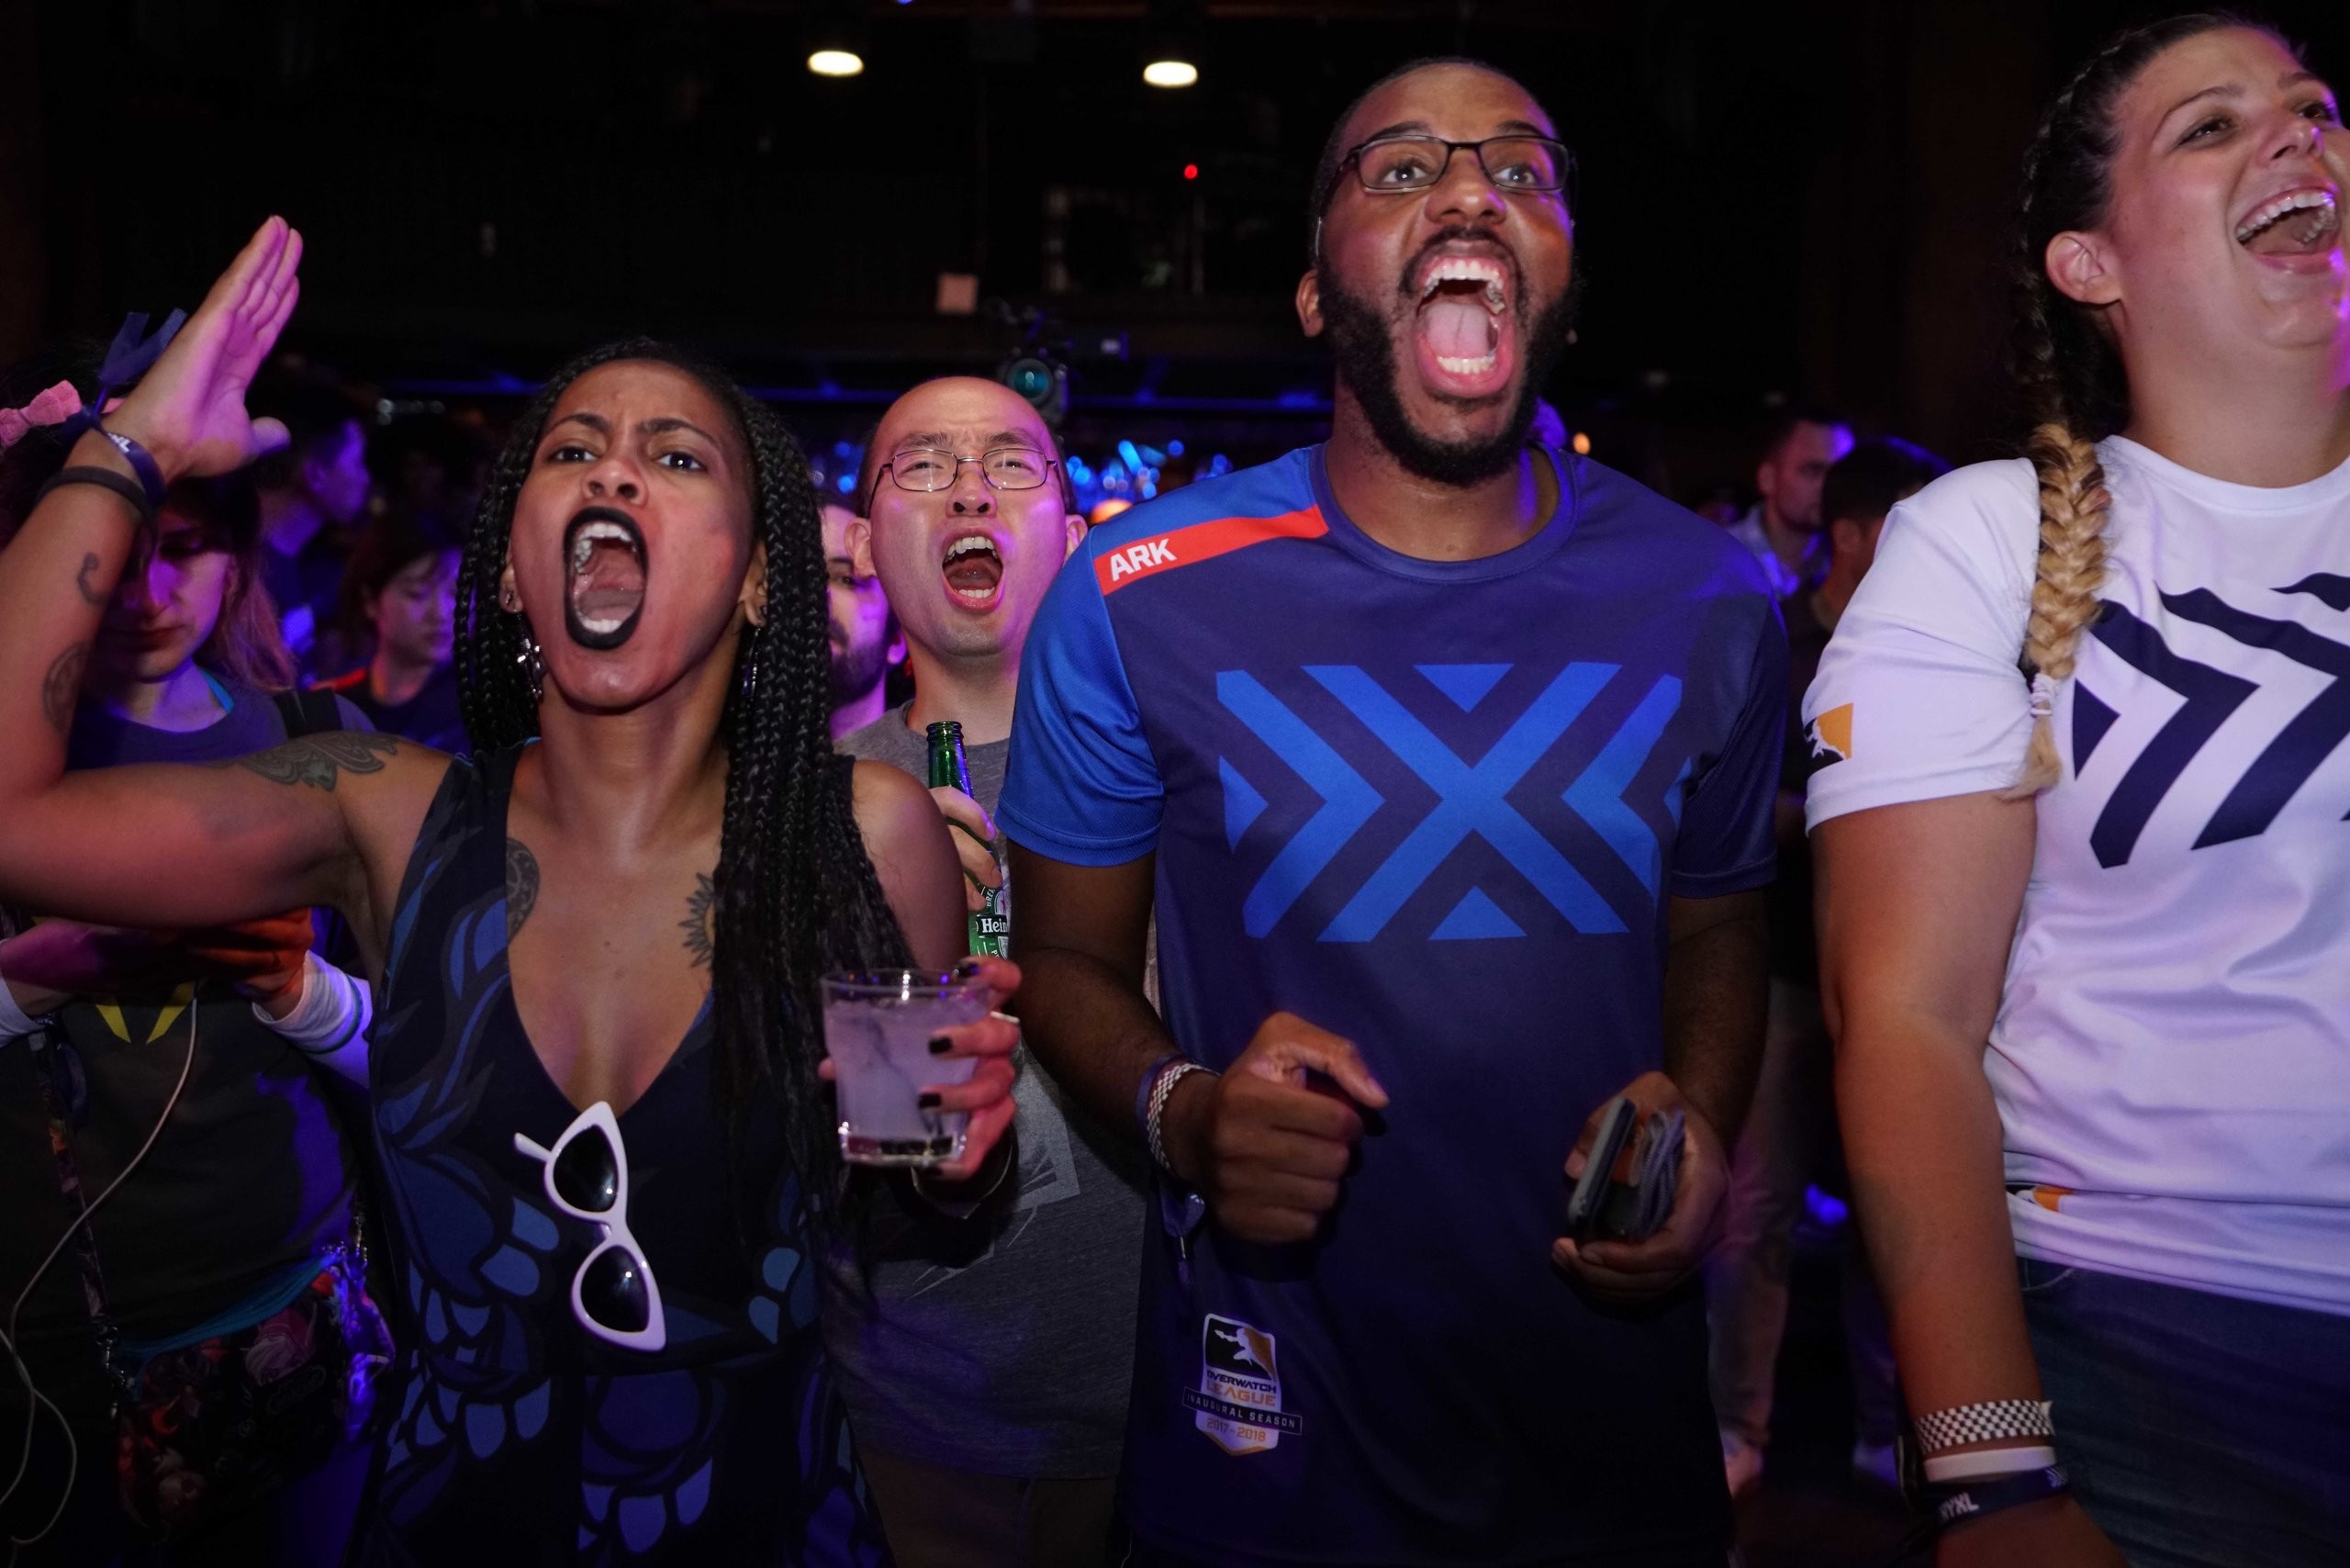 AndBox is a new e-sports organisation dedicated to New York City’s gaming culture. Photo: Andbox